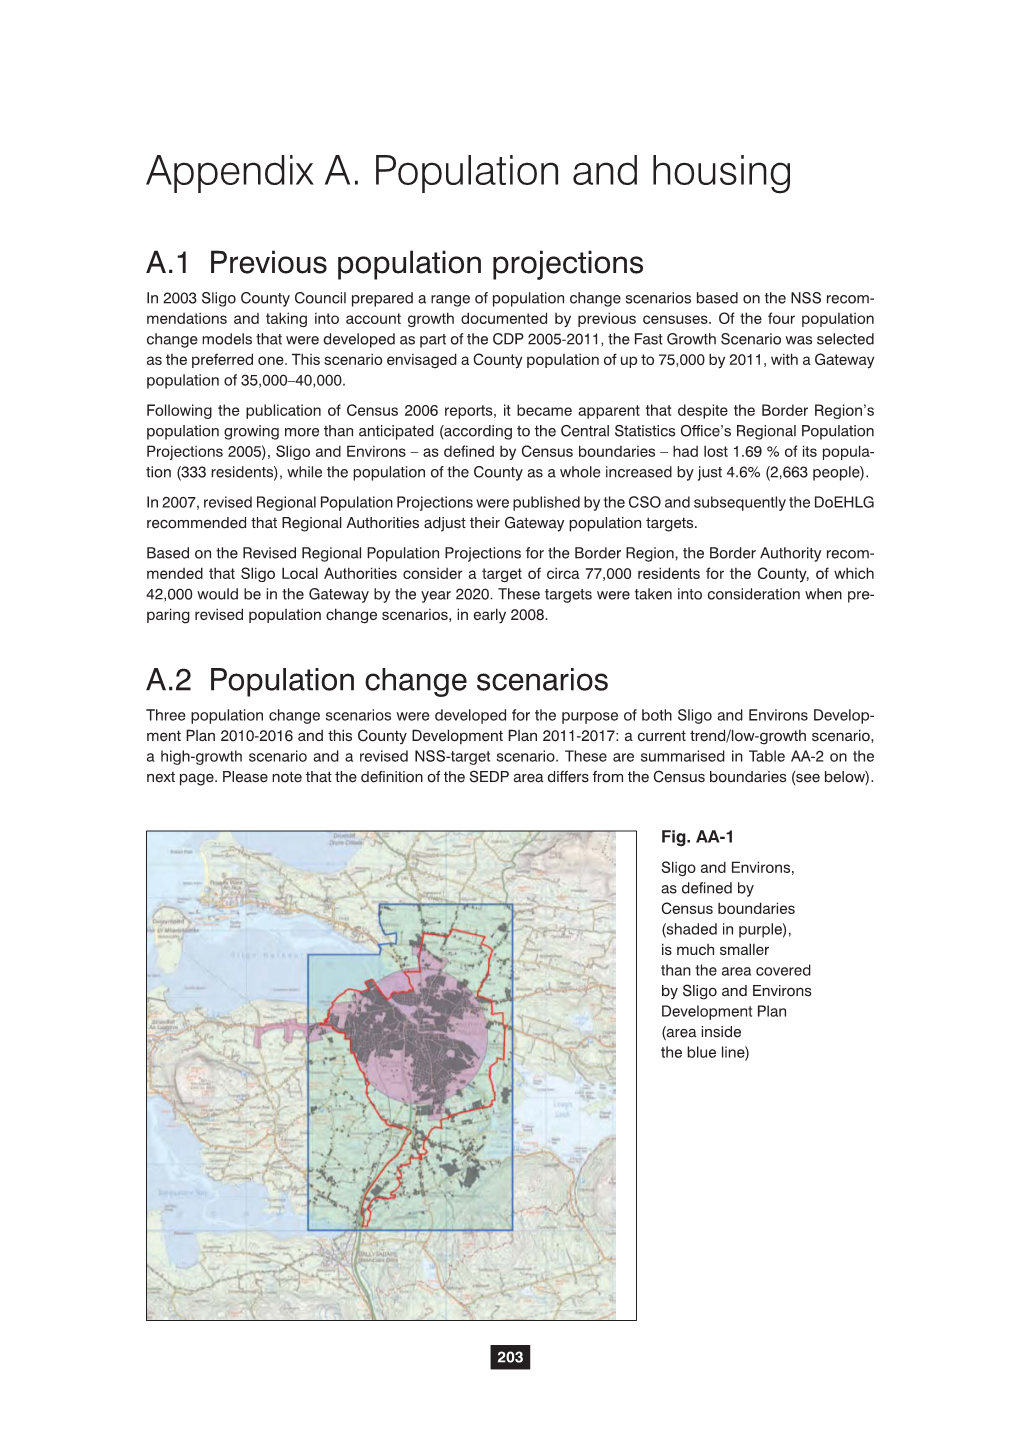 Appendix A. Population and Housing